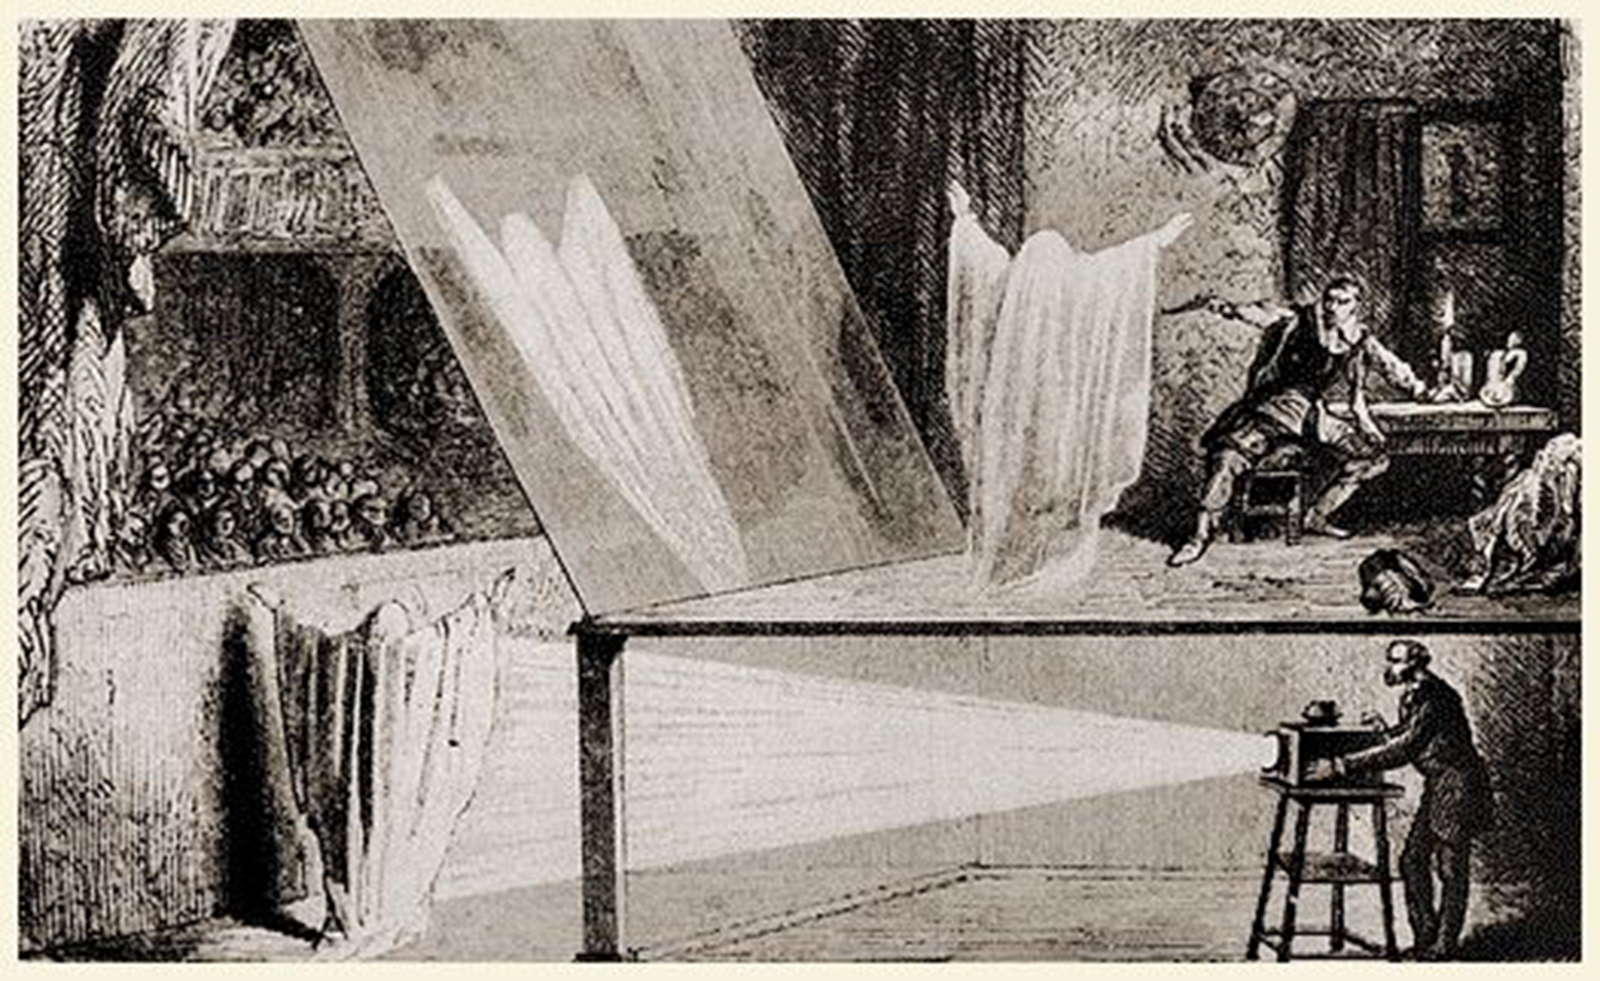 Illustration of how Pepper’s Ghost illusion worked, 1869.